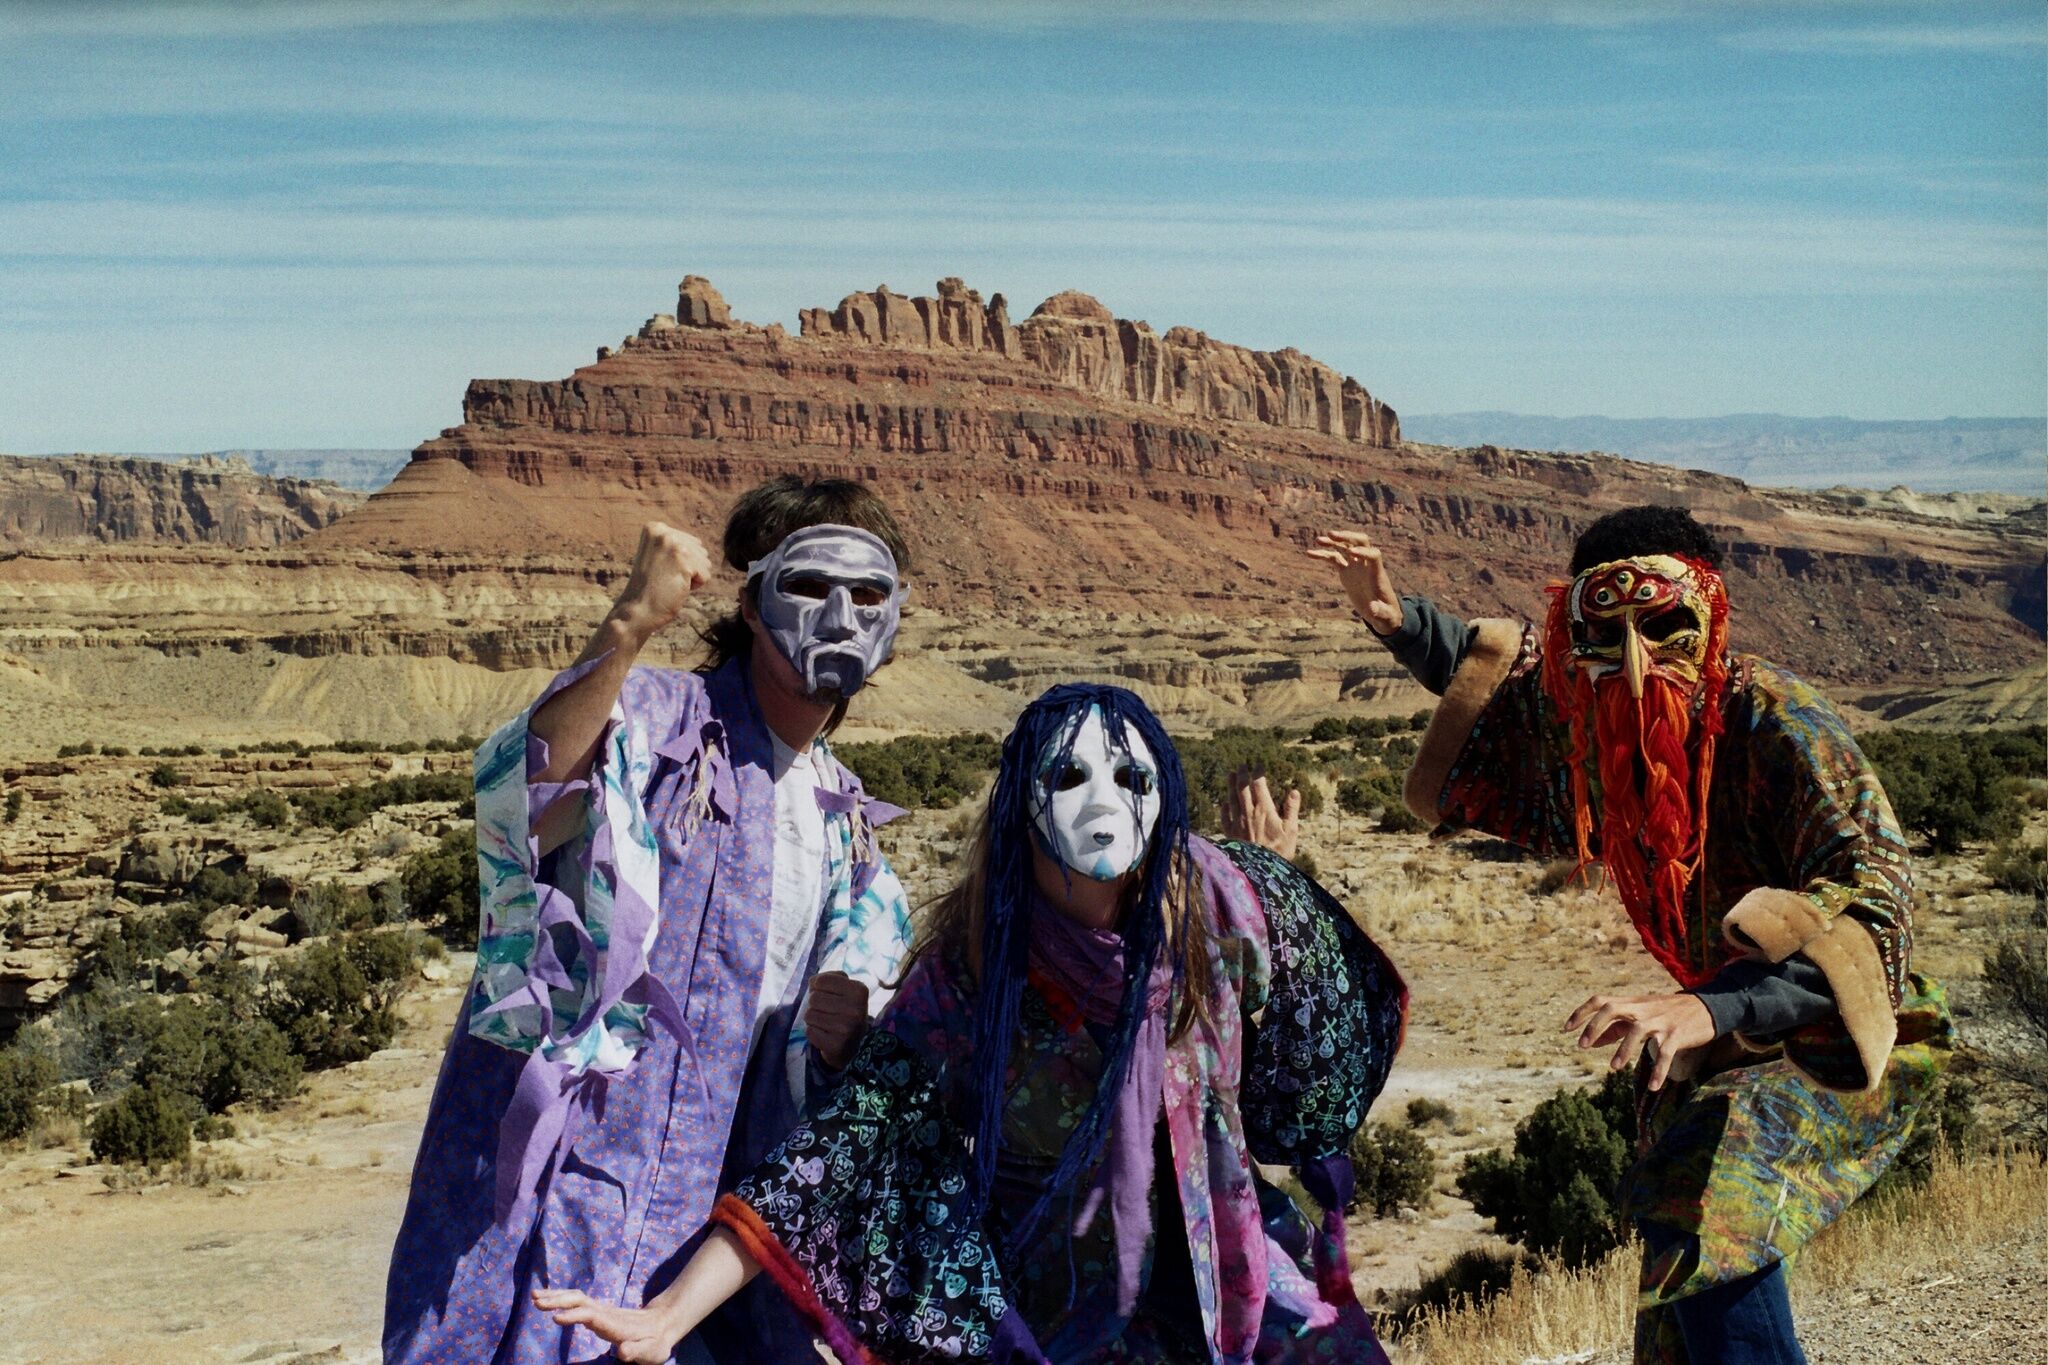 Three masked people in front of a desert landscape.